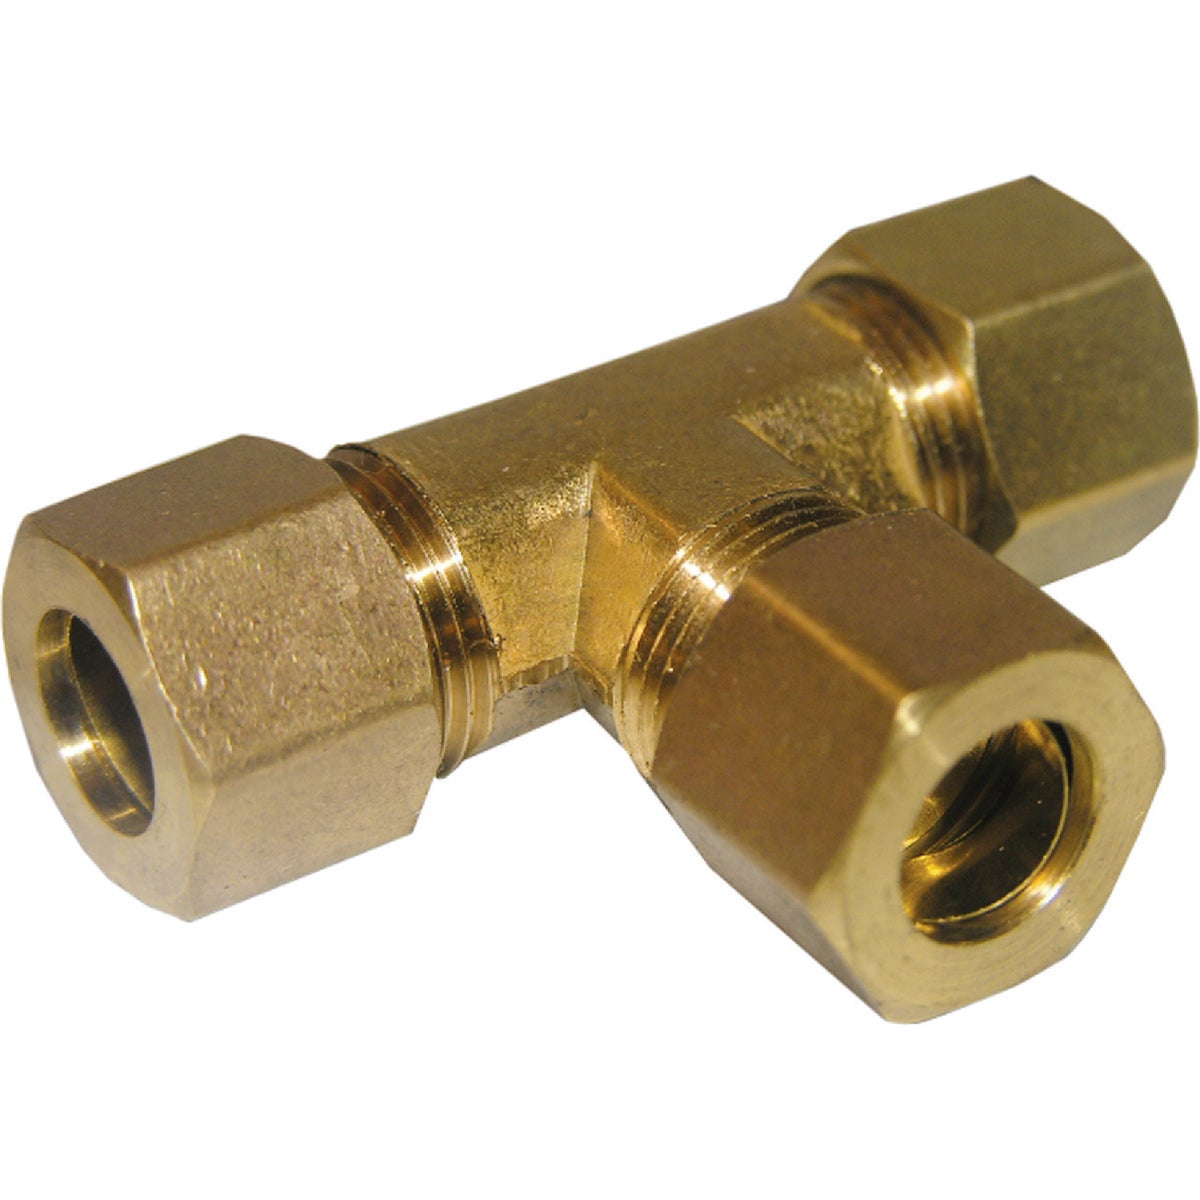 Lasco 1/2 In. x 1/2 In. x 1/2 In. Compression Brass Tee